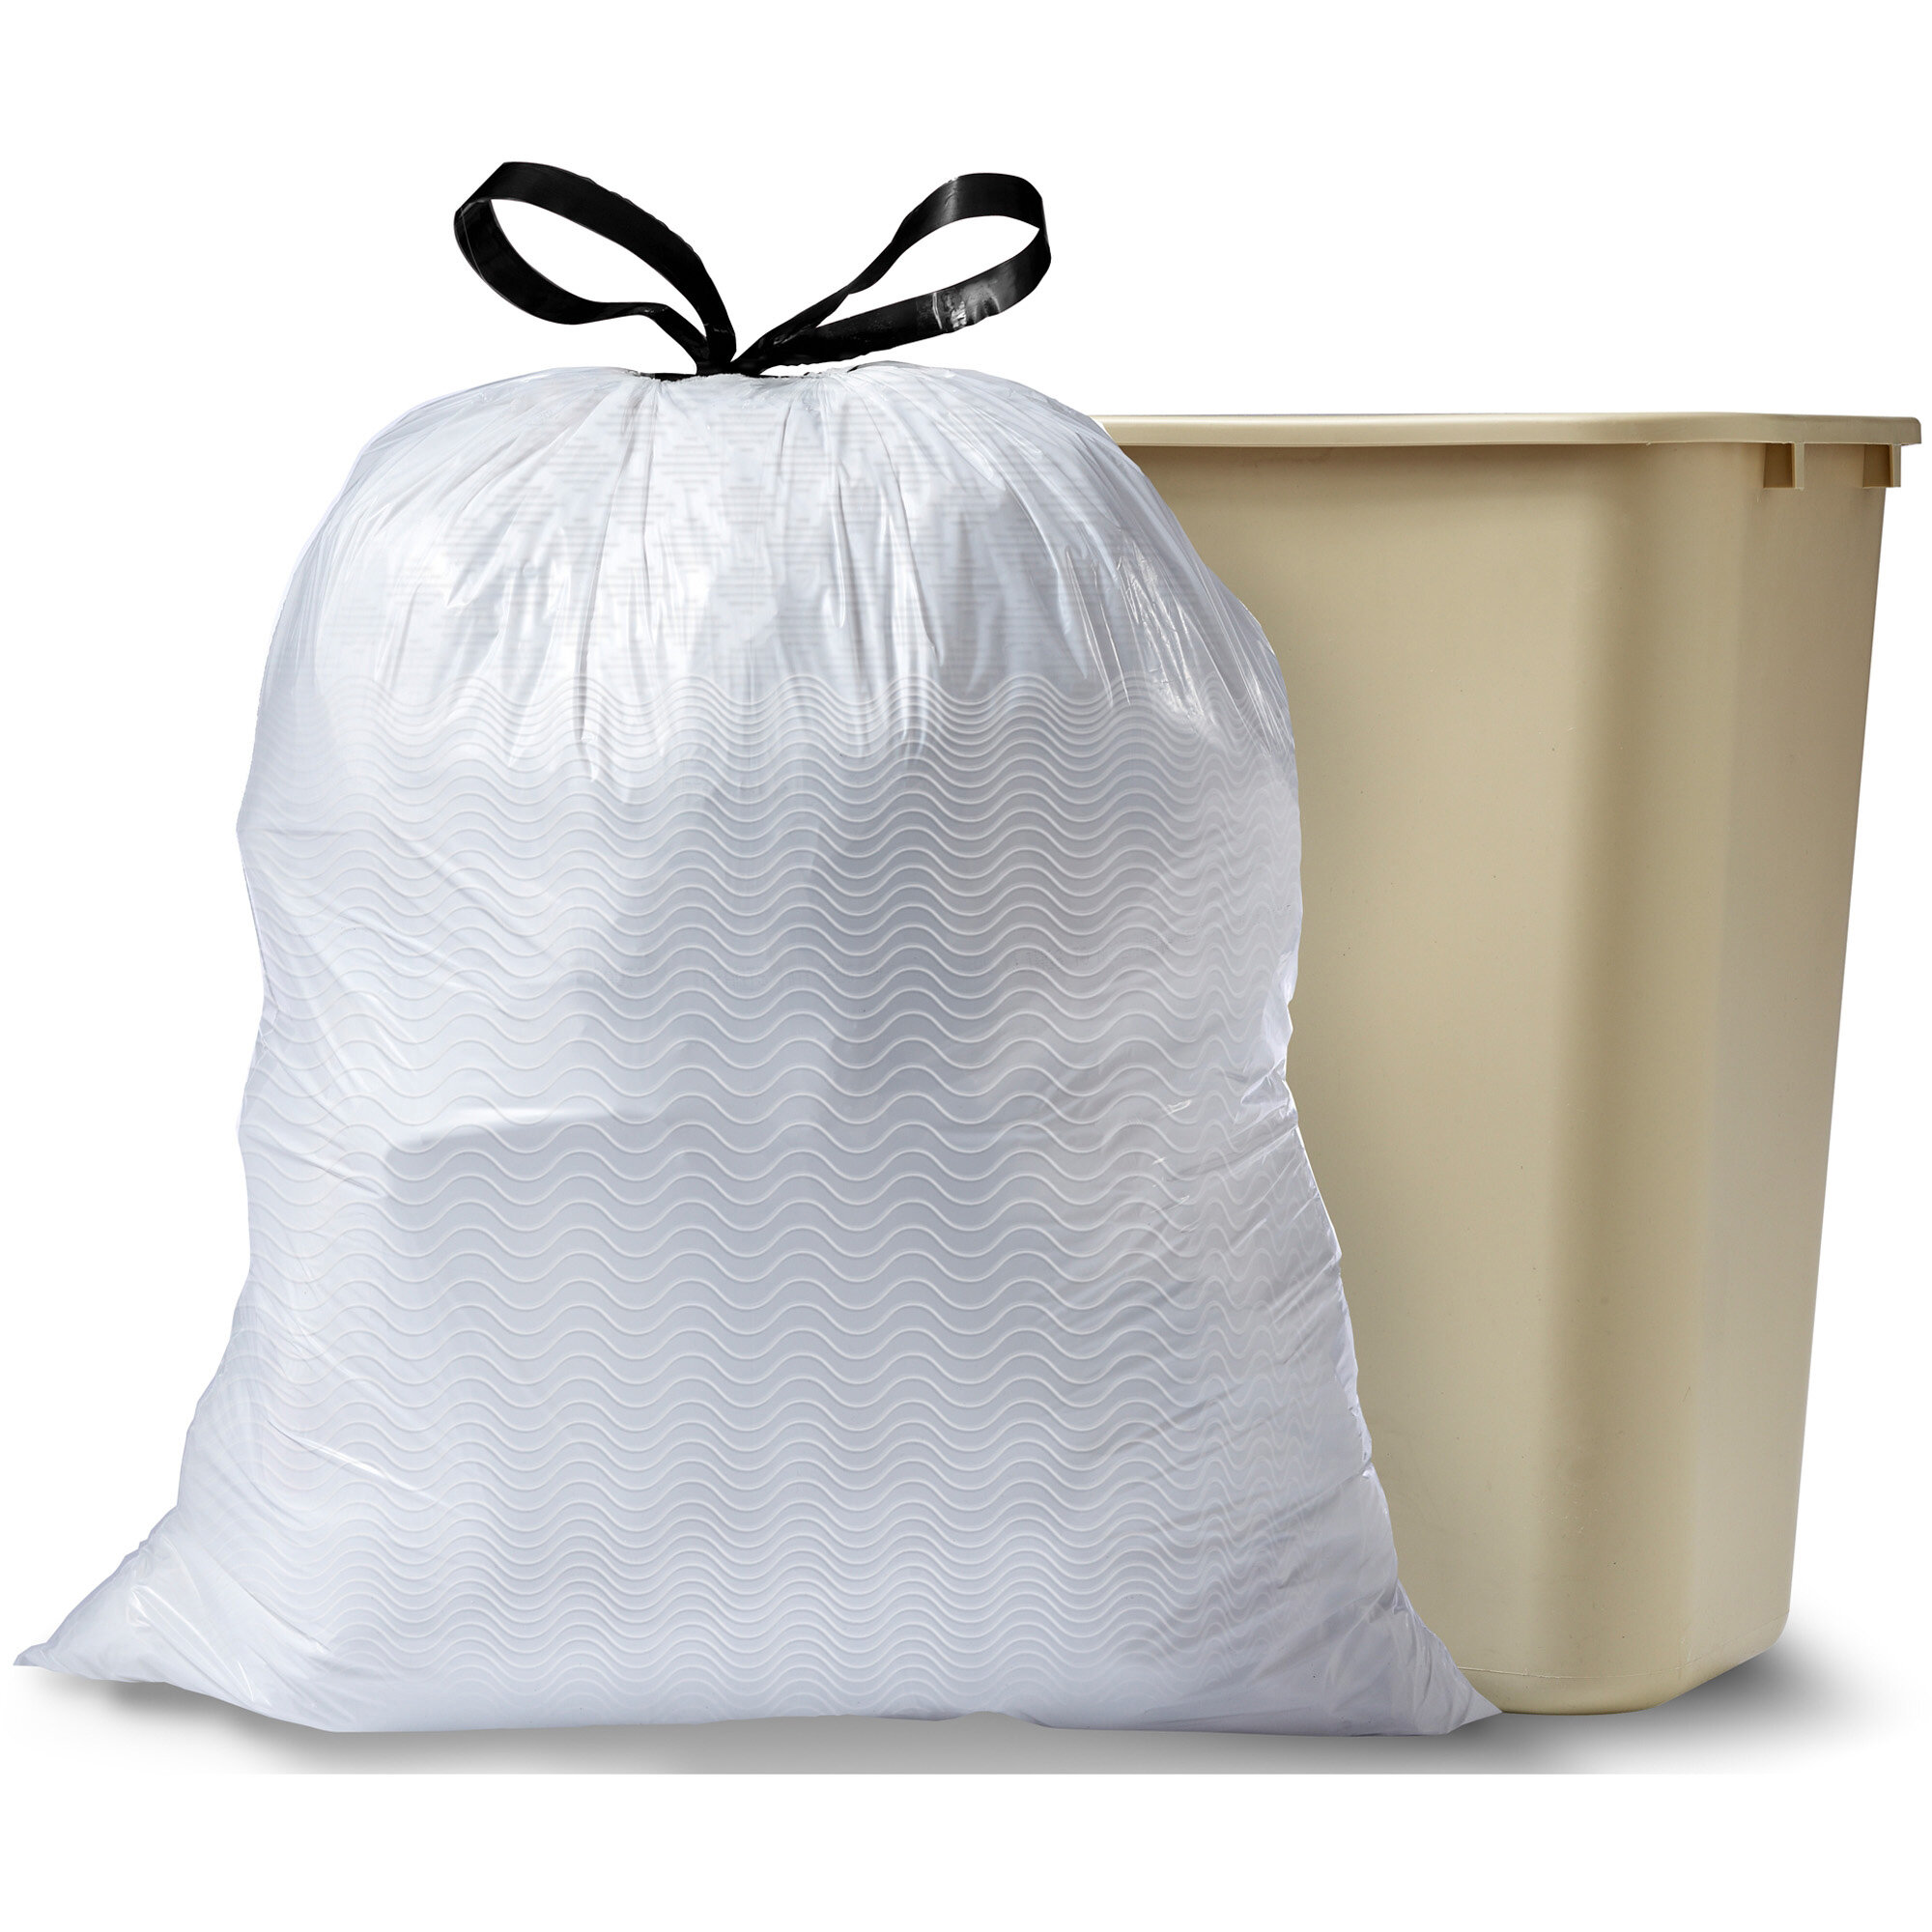 13 Gallons Plastic Trash Bags - 40 Count